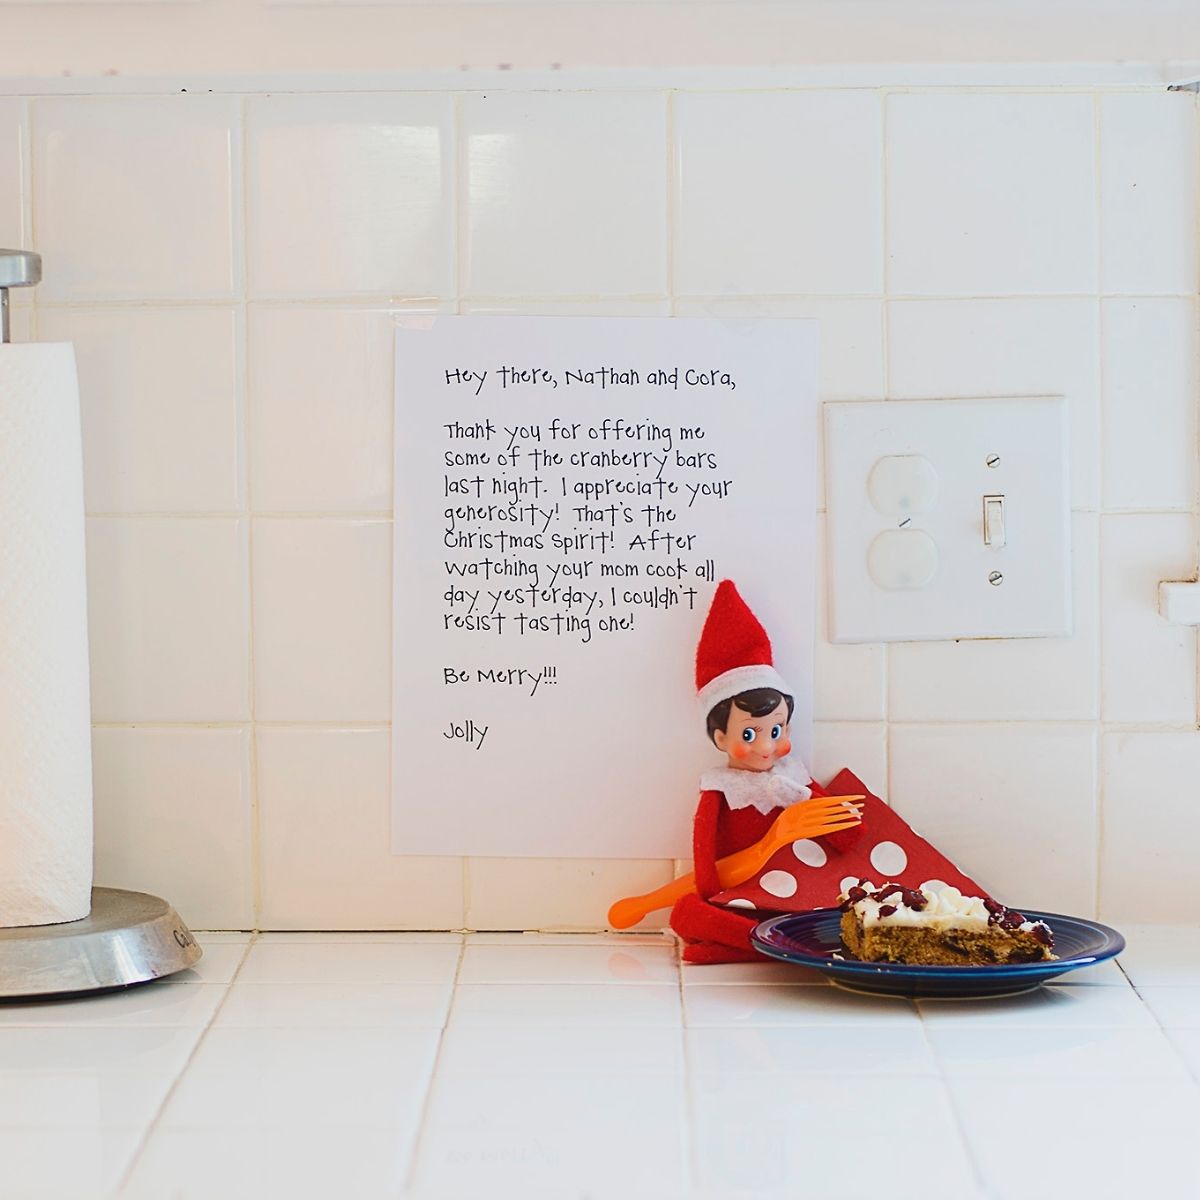 Elf on the Shelf sits on the kitchen counter with a note and some treats.